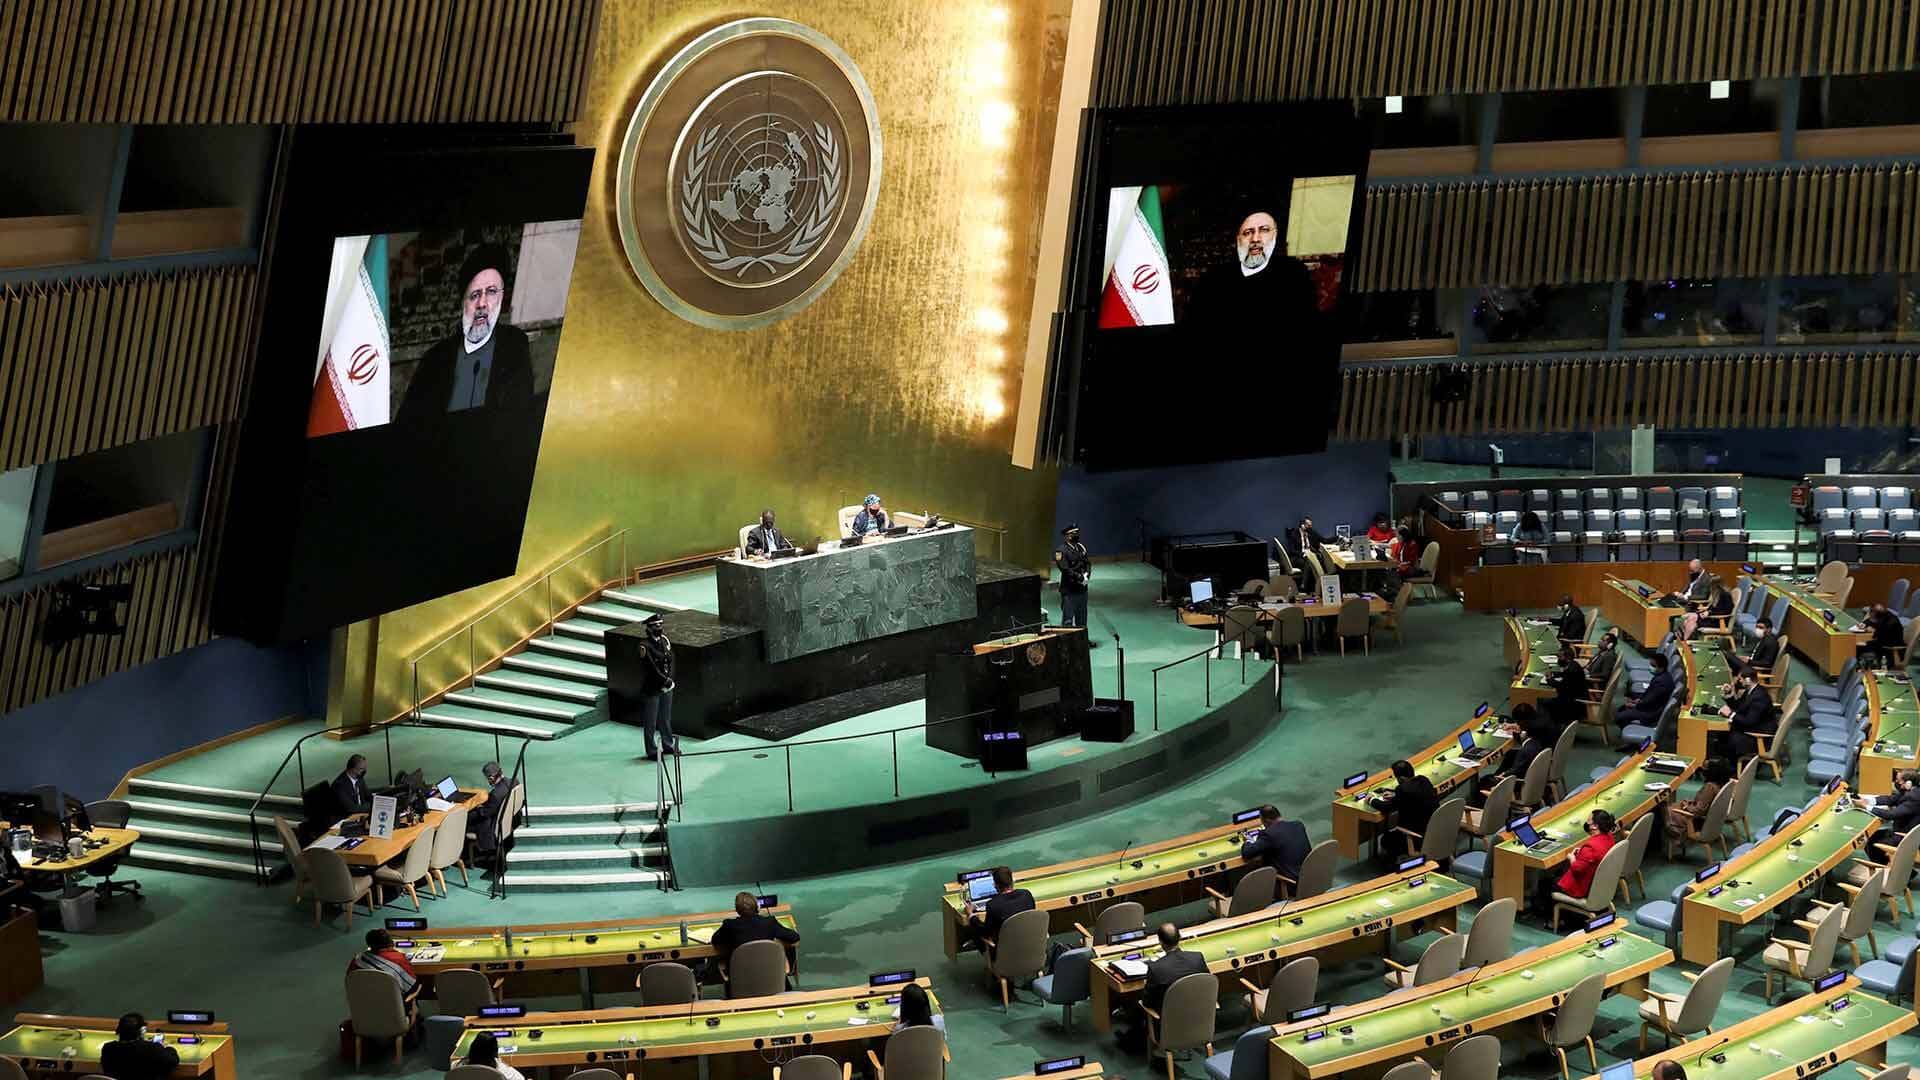 Iranian President Ebrahim Raisi on the screens remotely speaks during the General Debate of the 76th session of the United Nations General Assembly